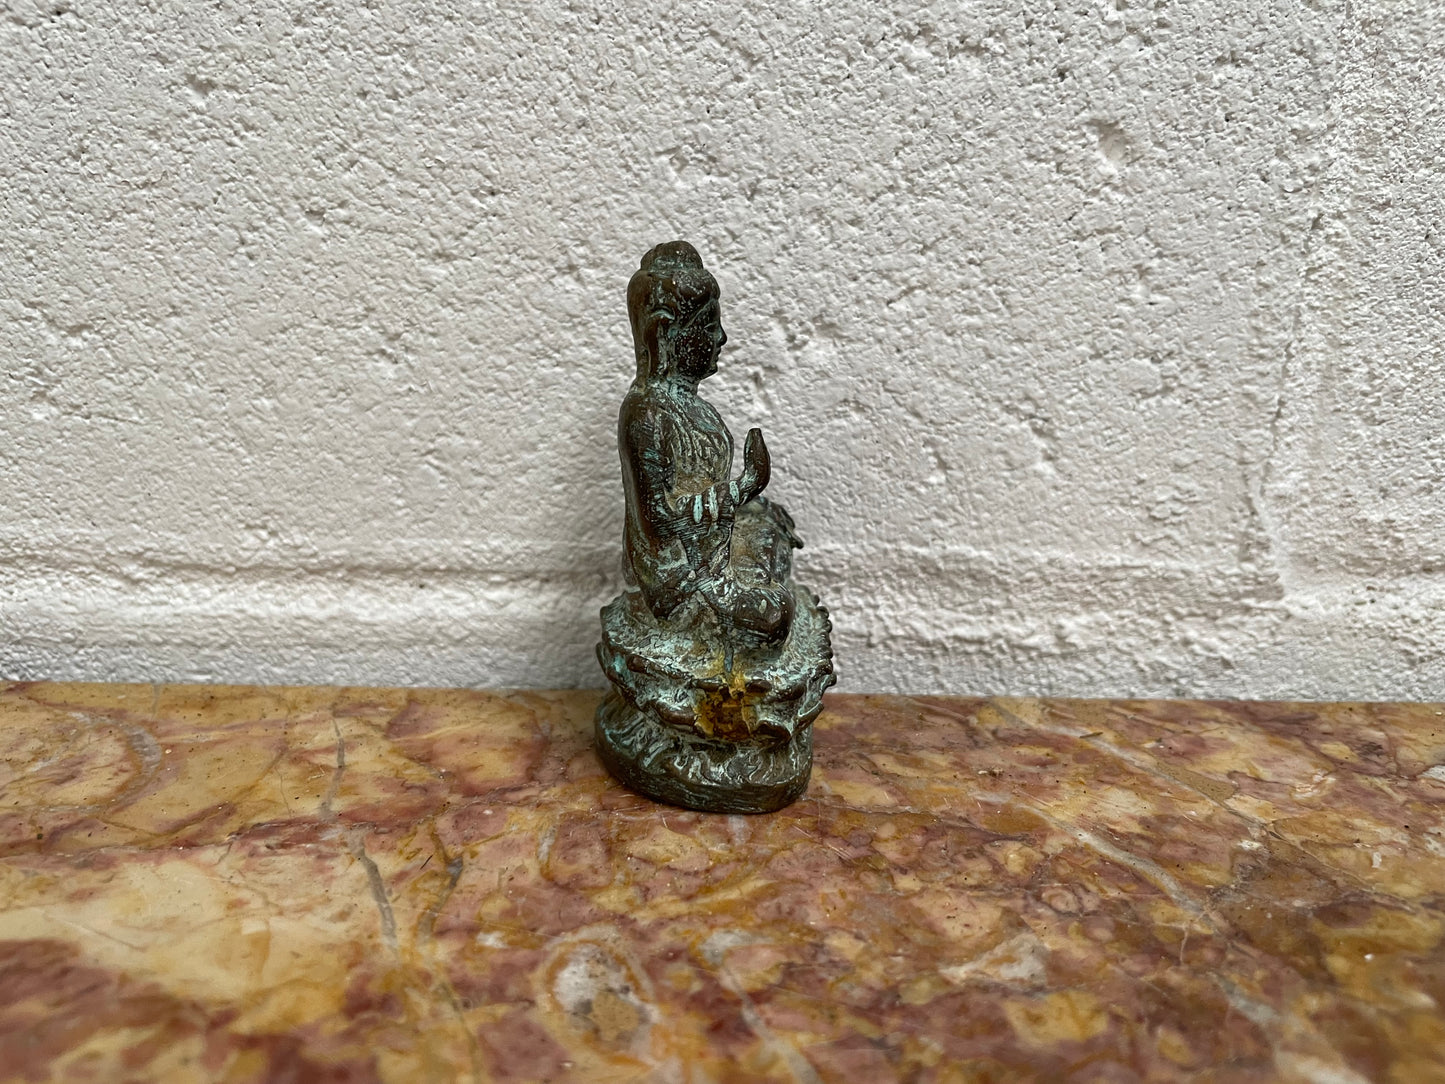 Antique bronze Buddha figure, sourced locally and in good original condition. 